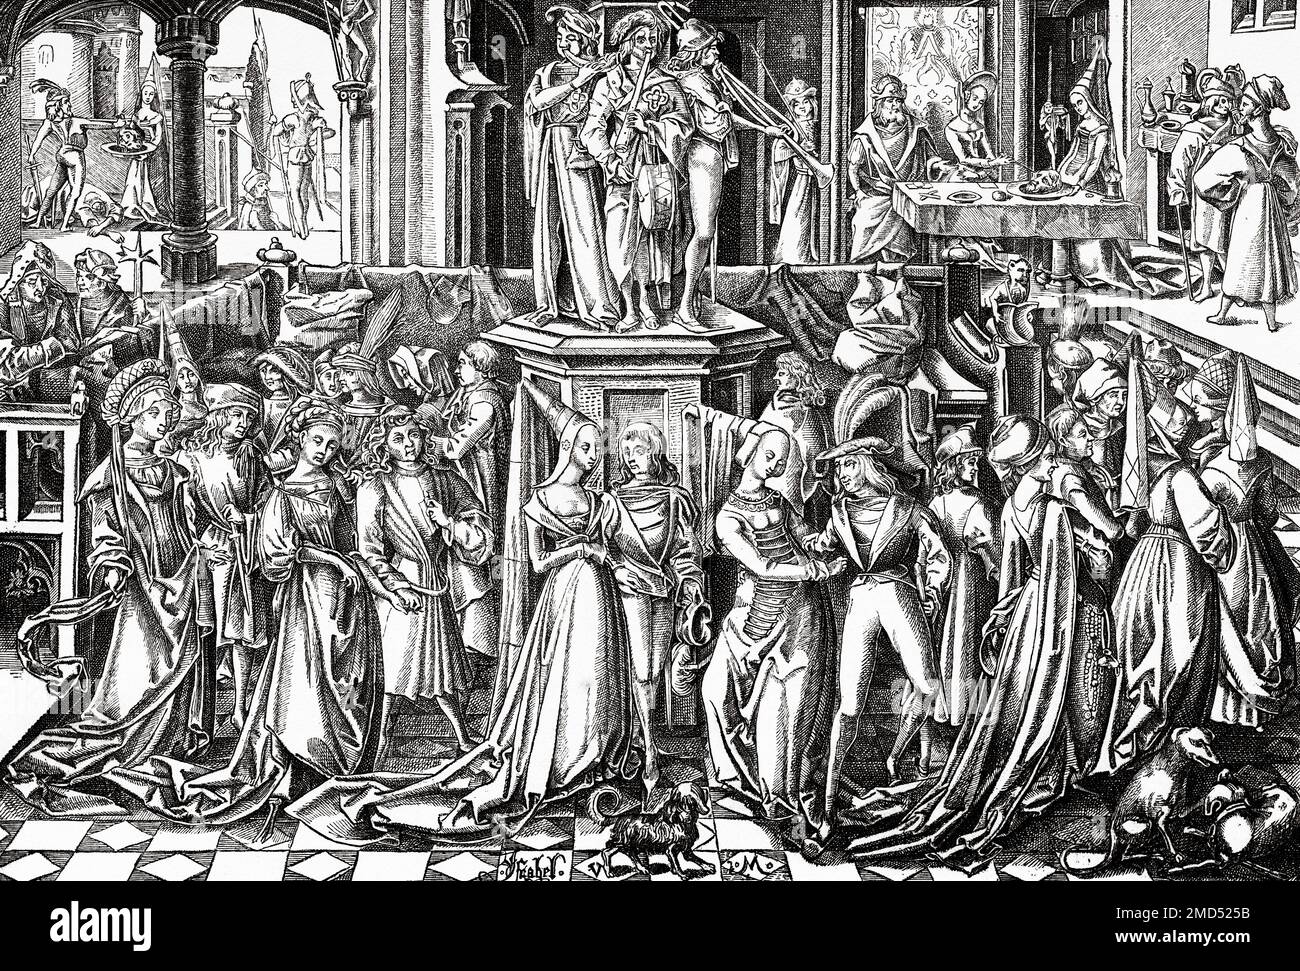 The Feast of Salome, 1490. From the opera Herodiade, 15th century. The Arts of the Middle Ages and at the Period of the Renaissance by Paul Lacroix, 1874 Stock Photo